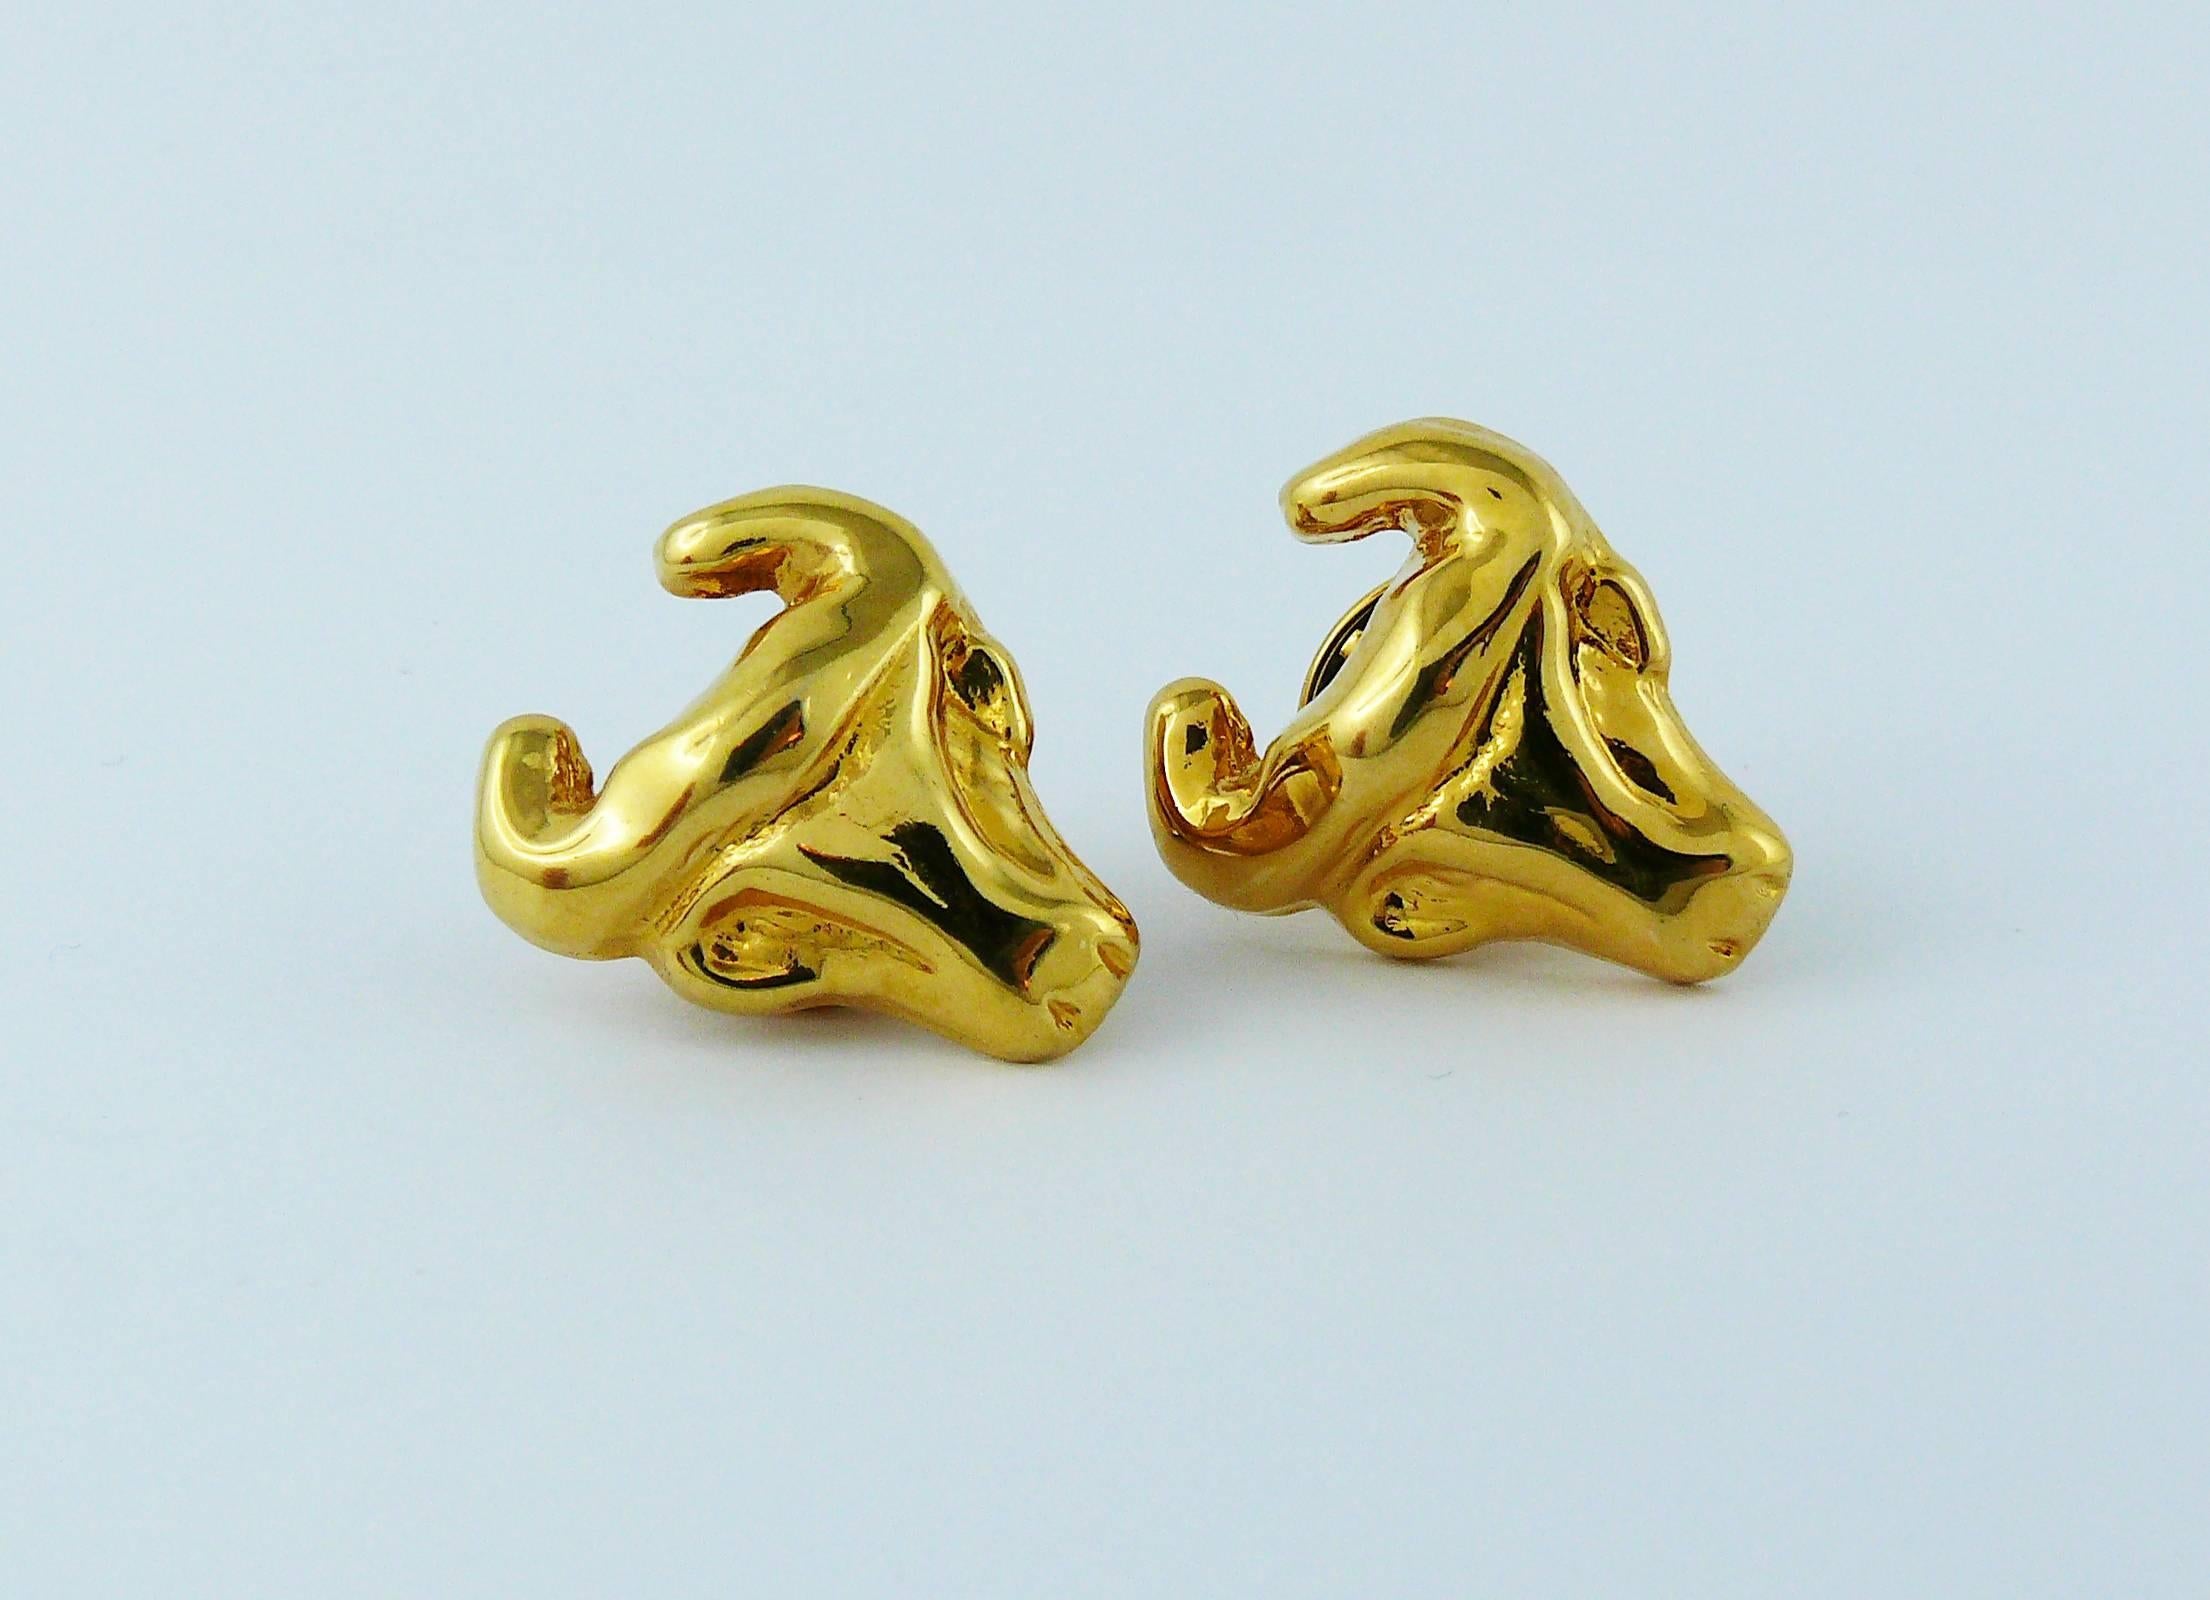 CHRISTIAN LACROIX vintage pair of gold toned bull head pin brooches.

Marked CL and ARTHUS BERTRAND Paris.

Indicative measurements : height approx. 2 cm (0.79 inch) / max. width approx. 1.6 cm (0.63 inch).


NOTES
- This is a preloved vintage item,